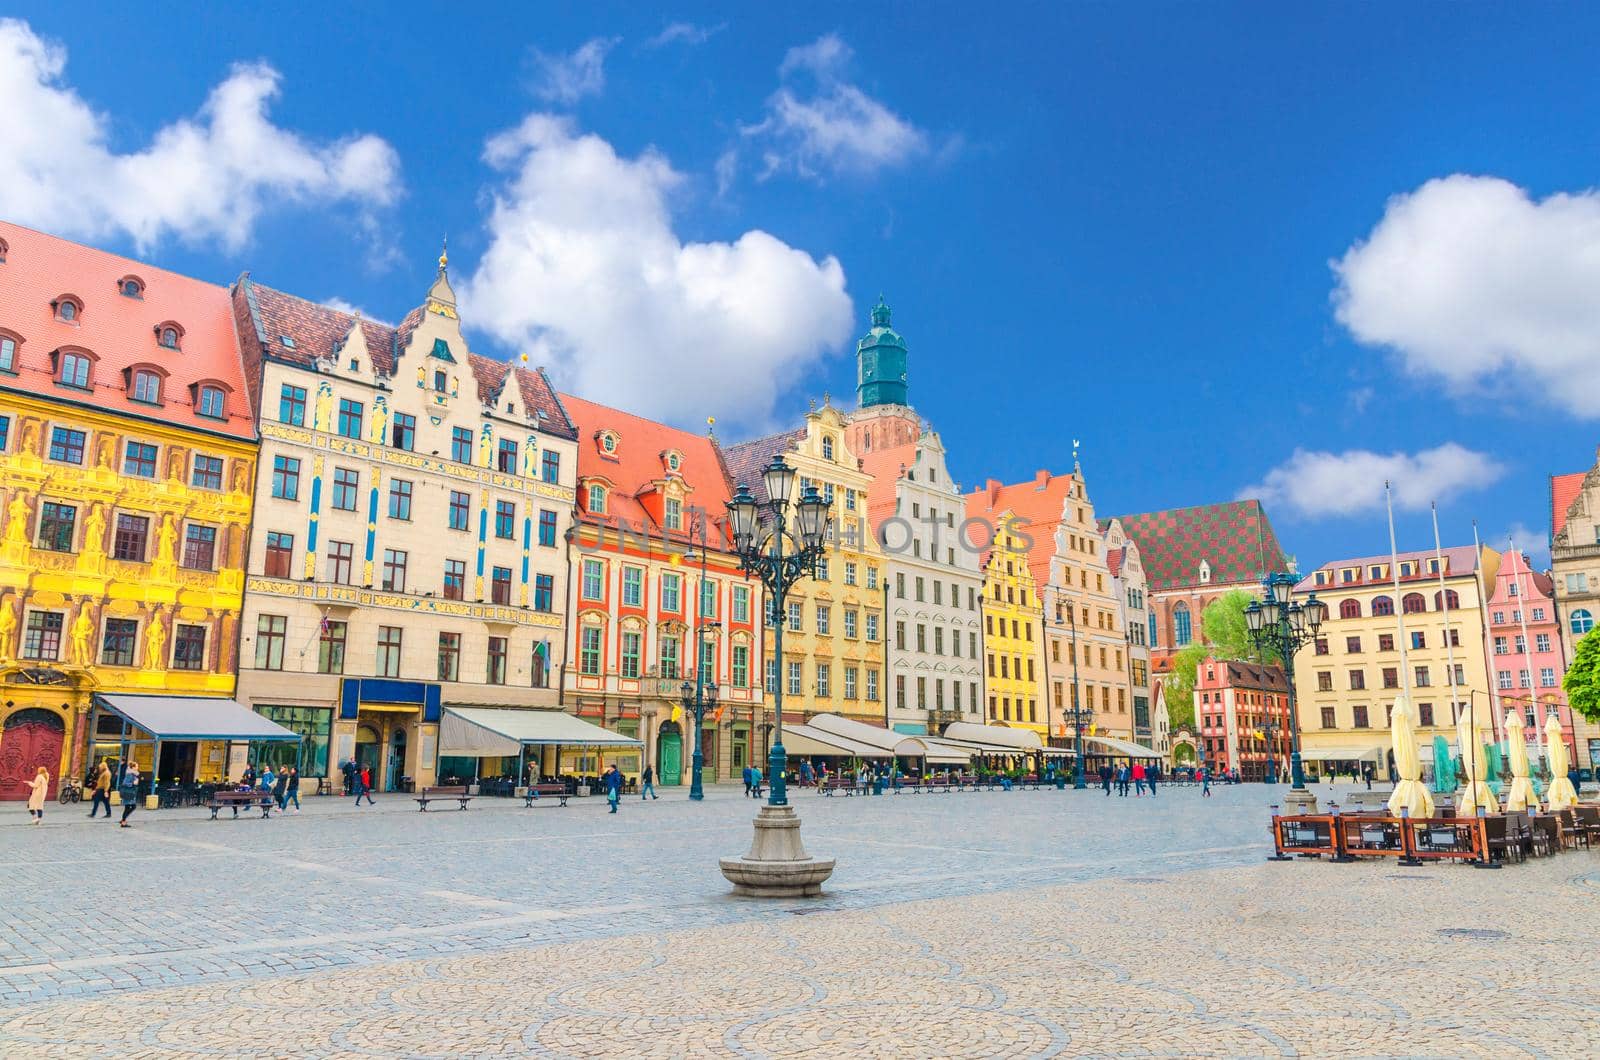 Row of colorful buildings with multicolored facade and St. Elizabeth Minor Basilica Garrison catholic Church on cobblestone Rynek Market Square in old town historical city centre of Wroclaw, Poland